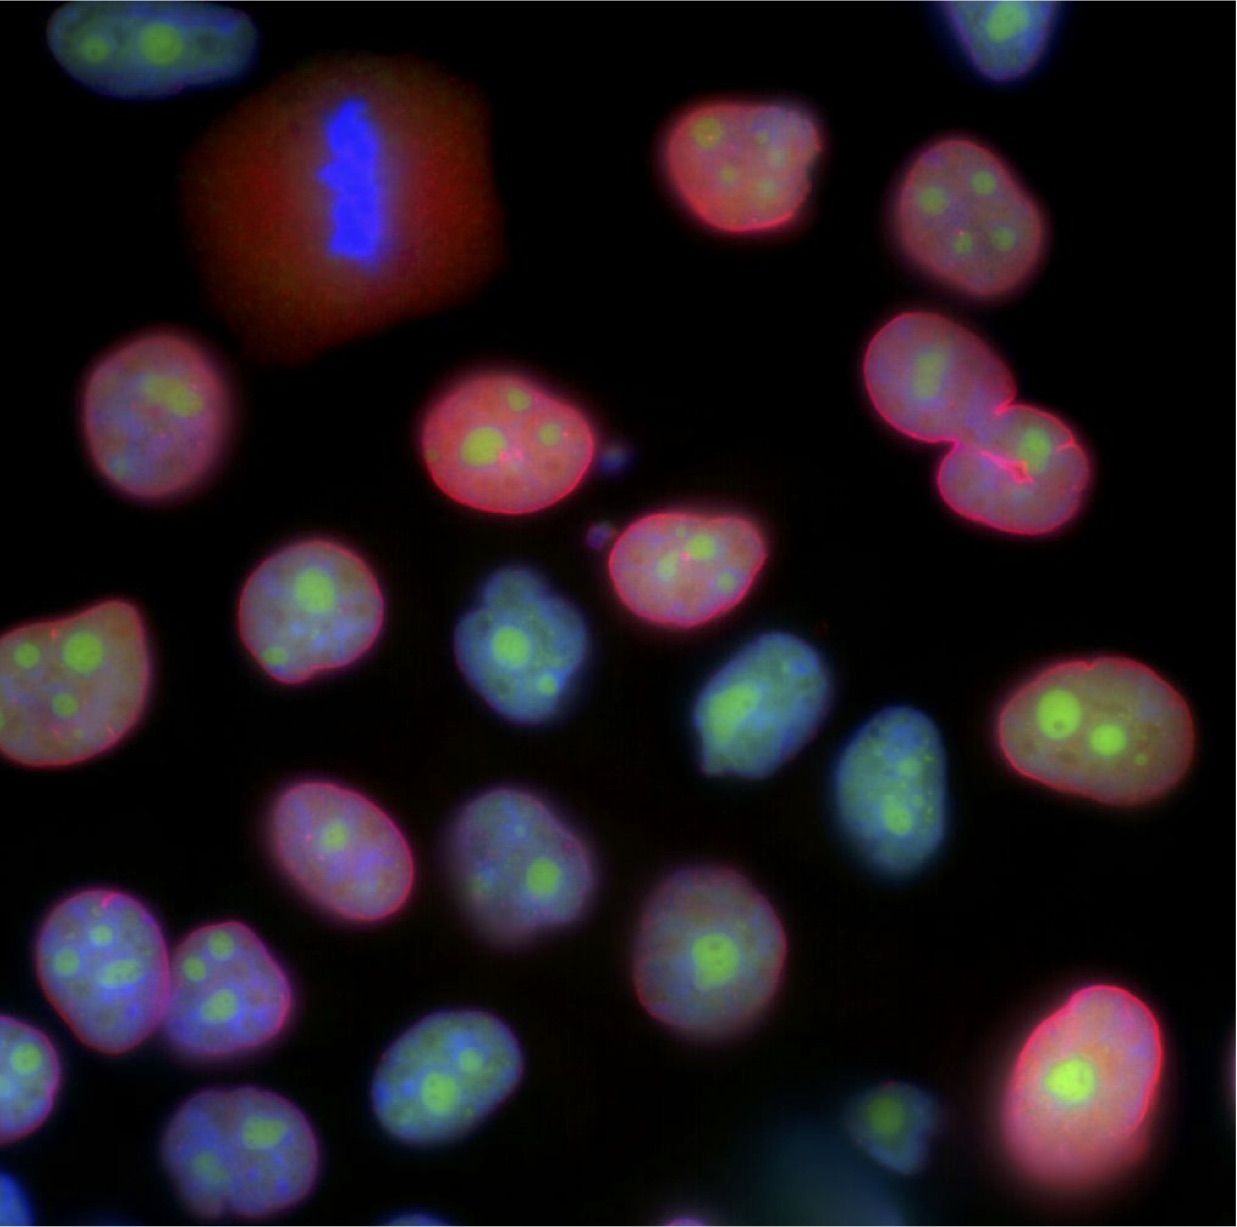 Microscope image of human cells stained with fluorescent markers for nuclear envelope proteins, DNA, and active gene transcription.